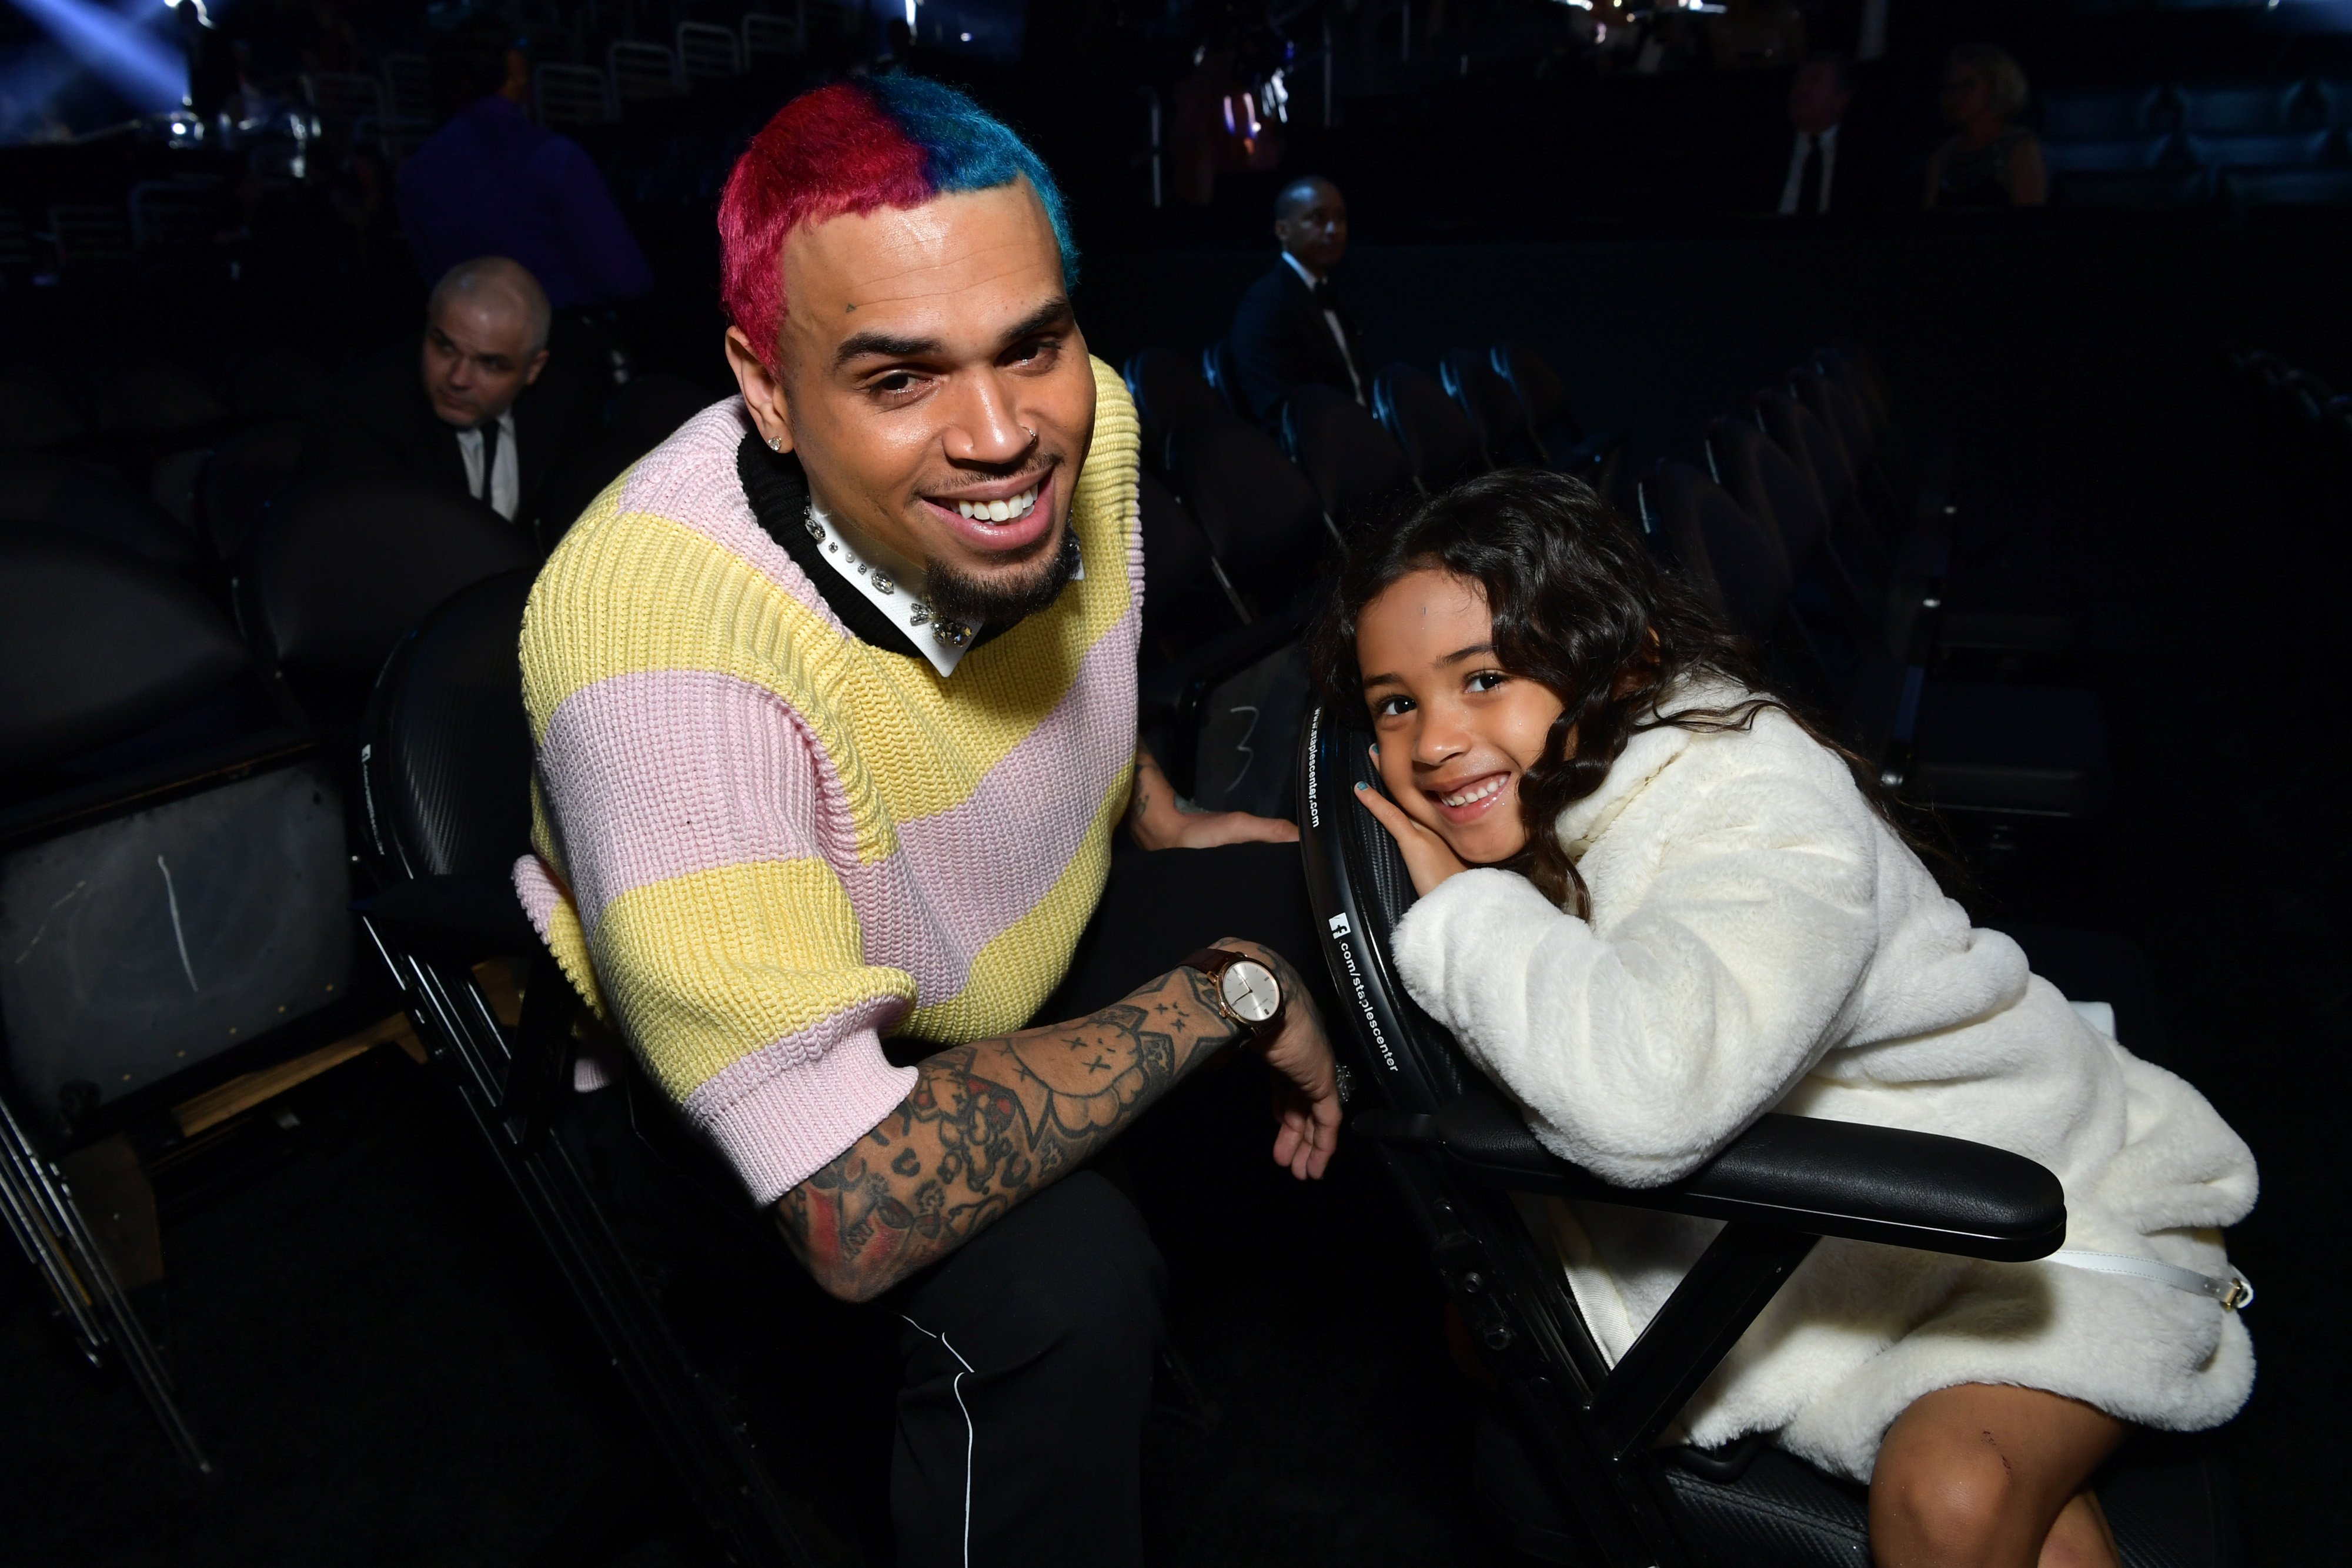 Chris Brown and his daughter, Royalty at the Grammy Awards in January 2020. | Photo: Getty Images